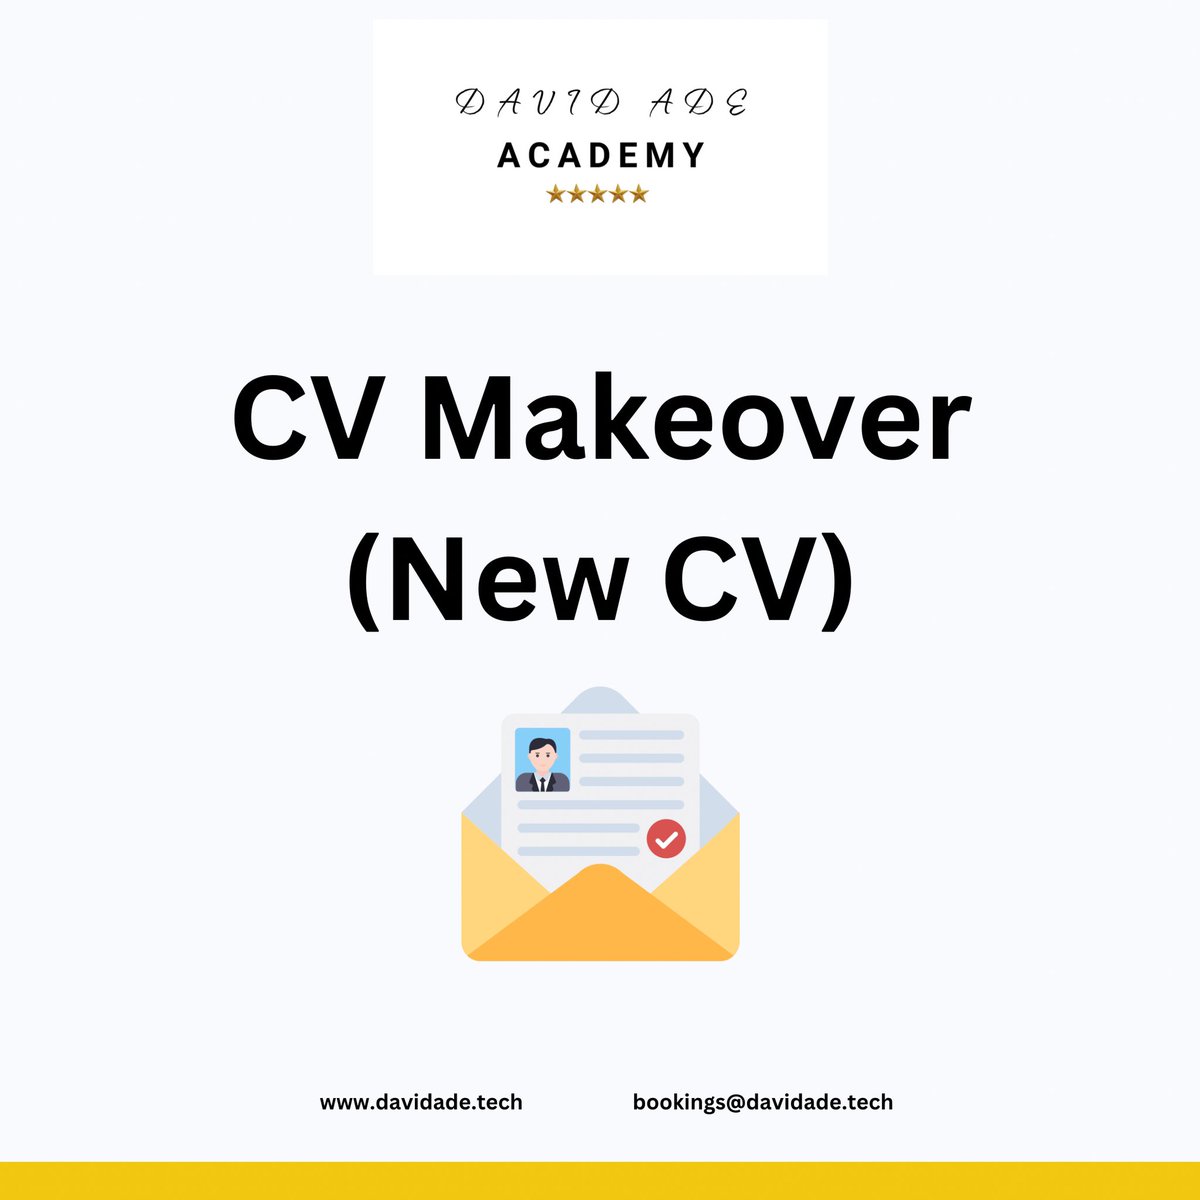 Are you struggling to get noticed by employers? 

Our CV makeover service can help. We will work with you to create a professional eye-catching CV that highlights your skills and experience.

Contact us today

#NewCv #DavidAdeAcademy #cvmakeover

Link: davidade.tech